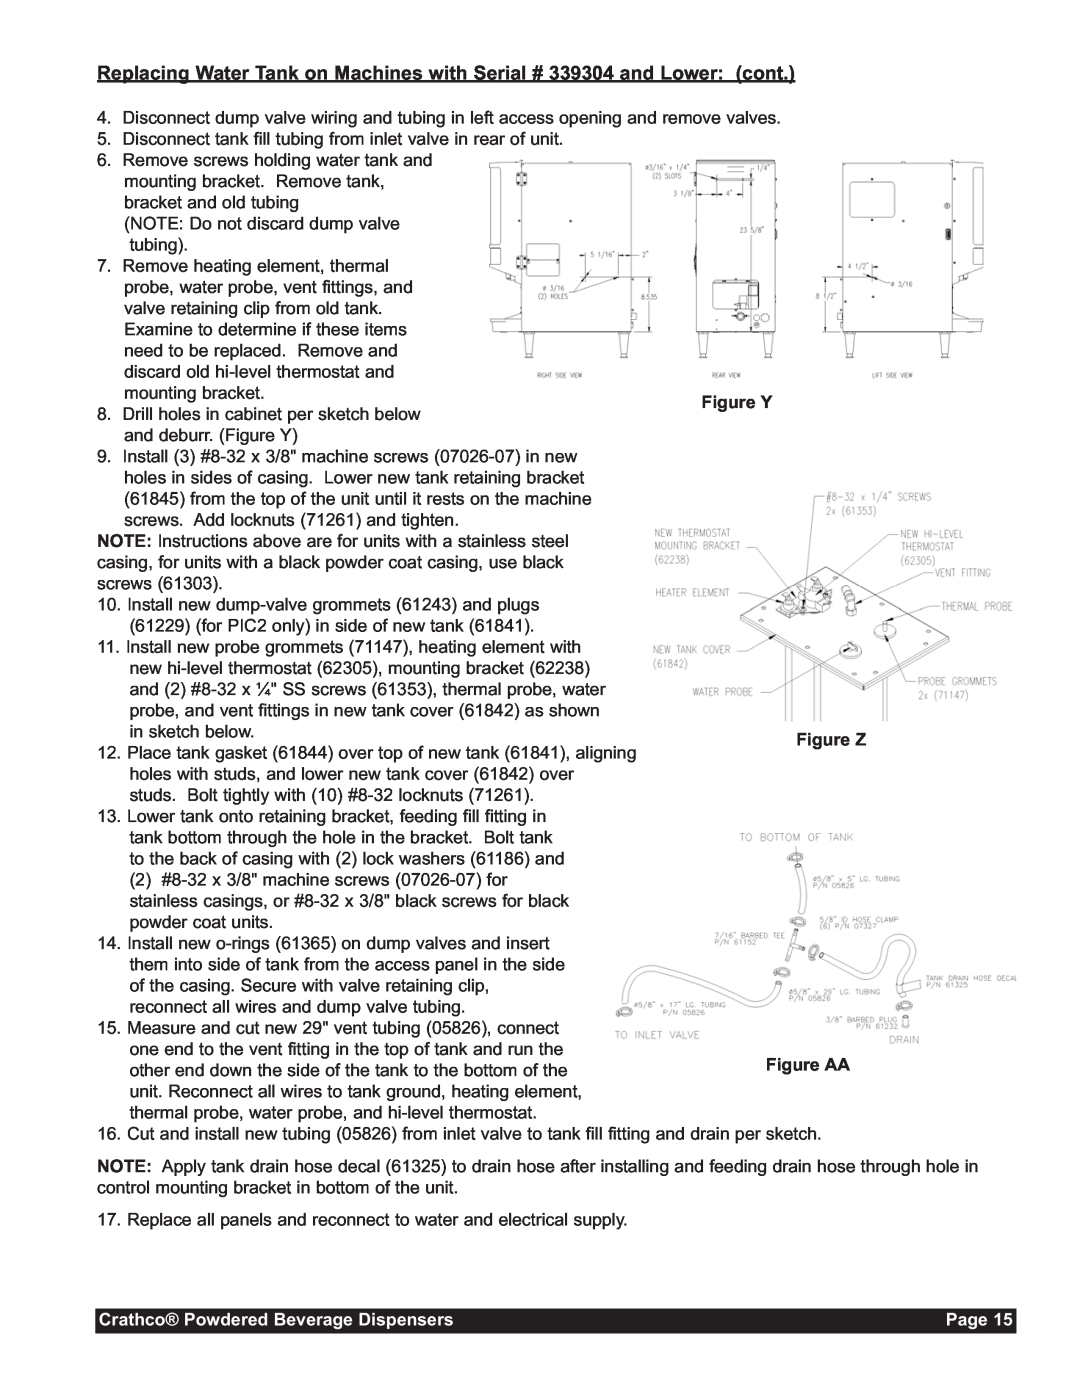 Grindmaster CC-302-20 service manual Replacing Water Tank on Machines with Serial # 339304 and Lower cont, Page 